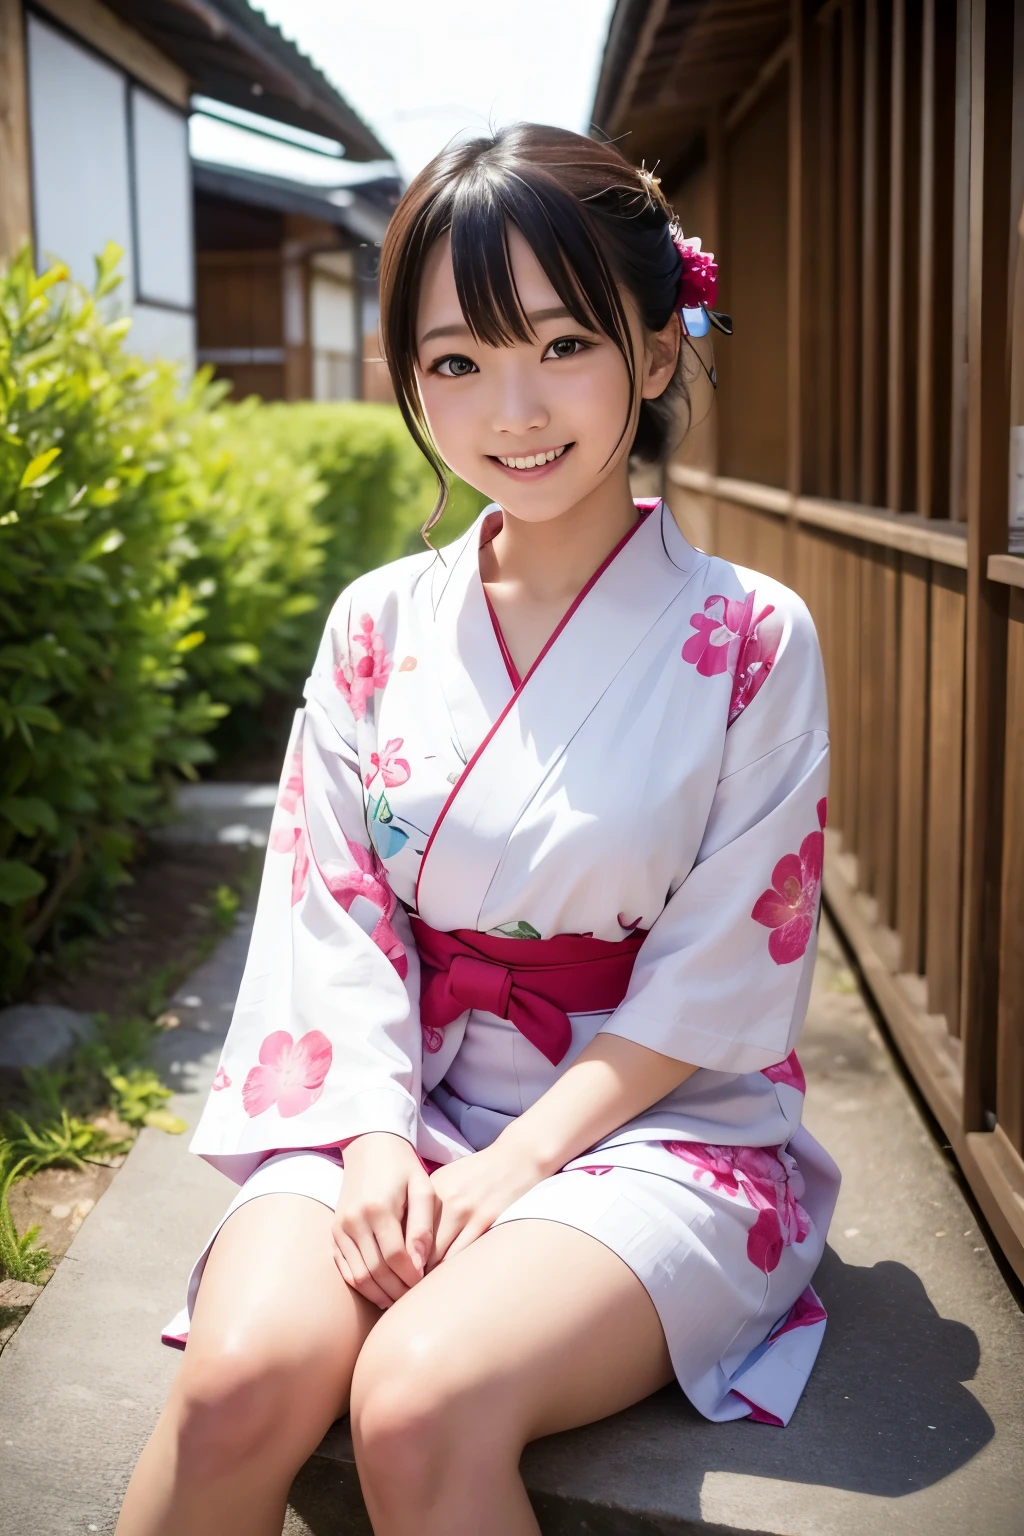 Mini yukata, sitting pose, looking at camera, beautiful girl, bright smile, summer, outside the house, alley, tying hair, Japanese., ccurate, textured skin, anatomically correct, super detail, high details, high quality, highres, best quality